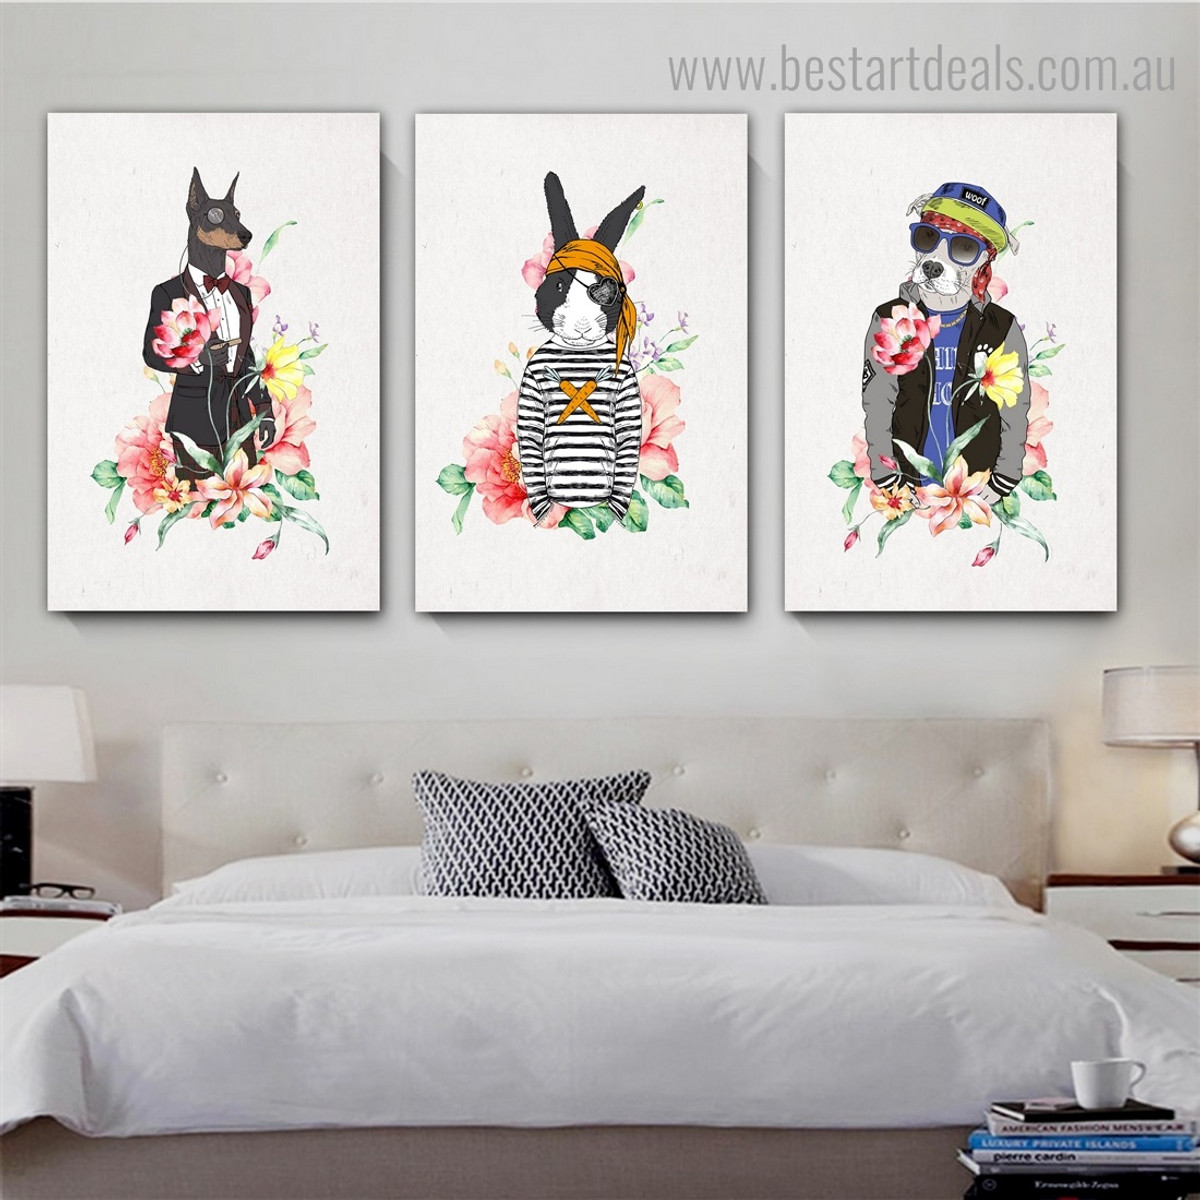 Hare and Dogs Animal Modern Framed Artwork Picture Canvas Print for Room Wall Assortment